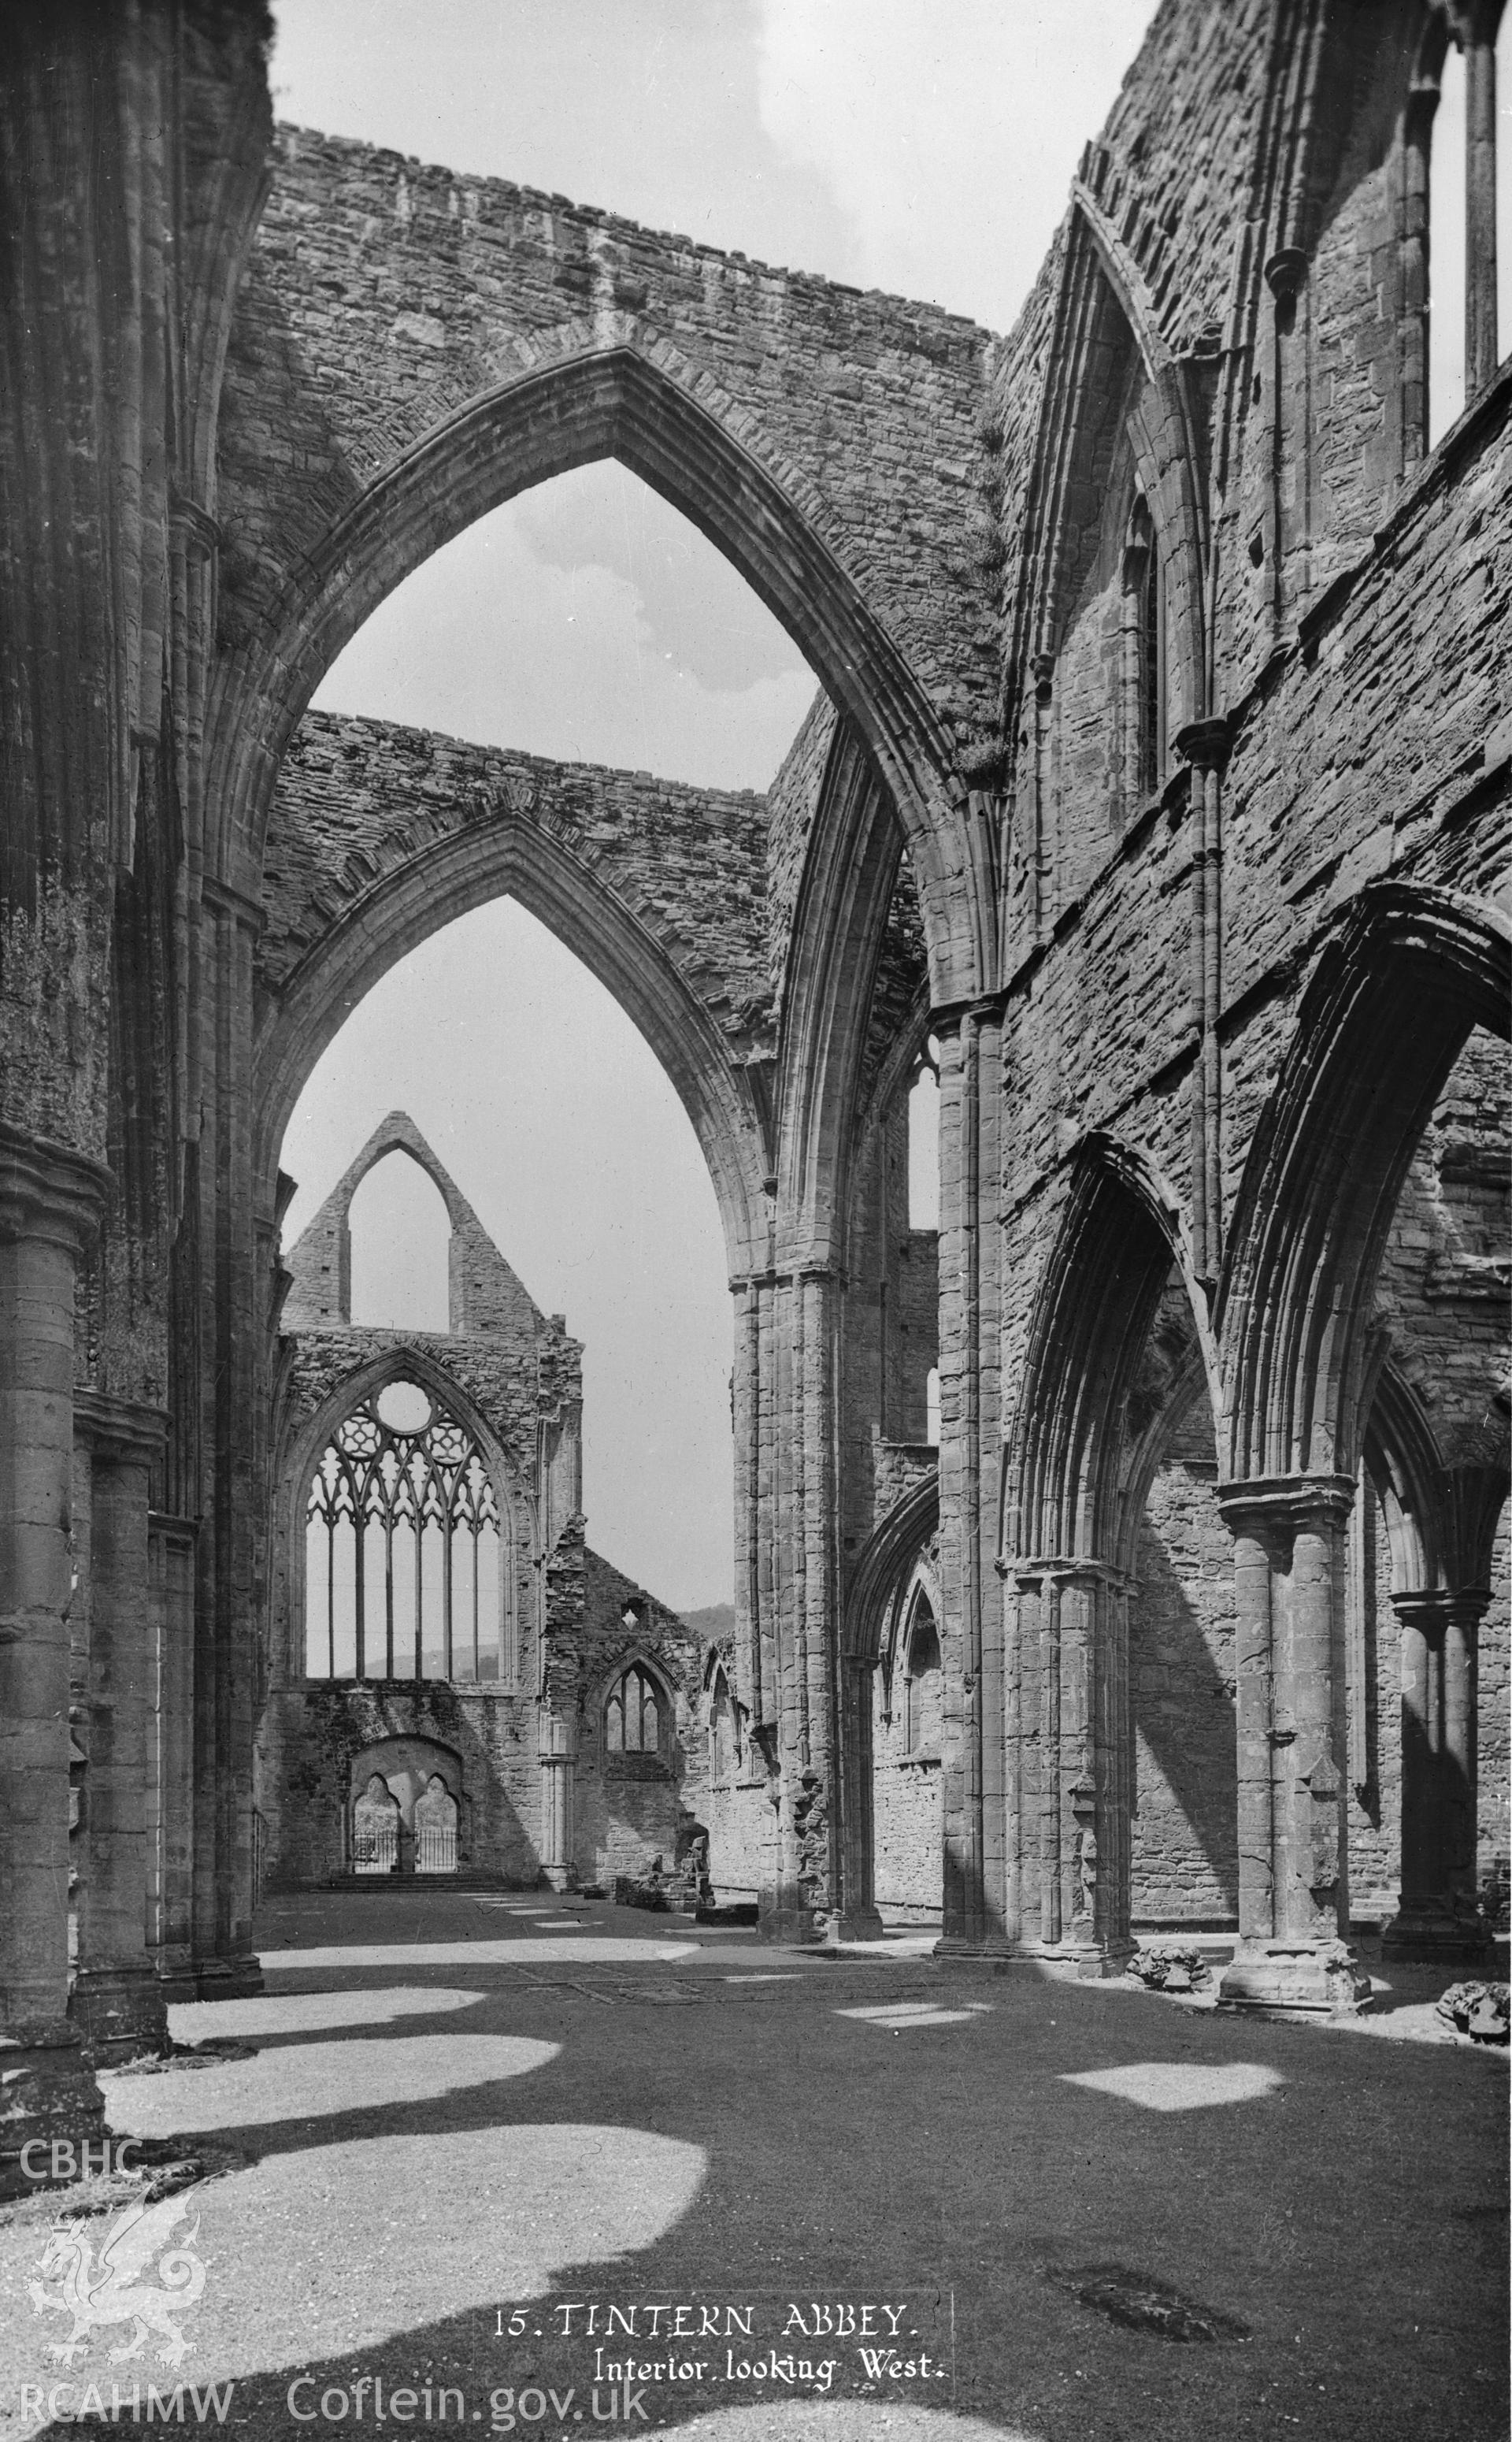 D.O.E. black and white negative of Tintern Abbey: Interior looking West.